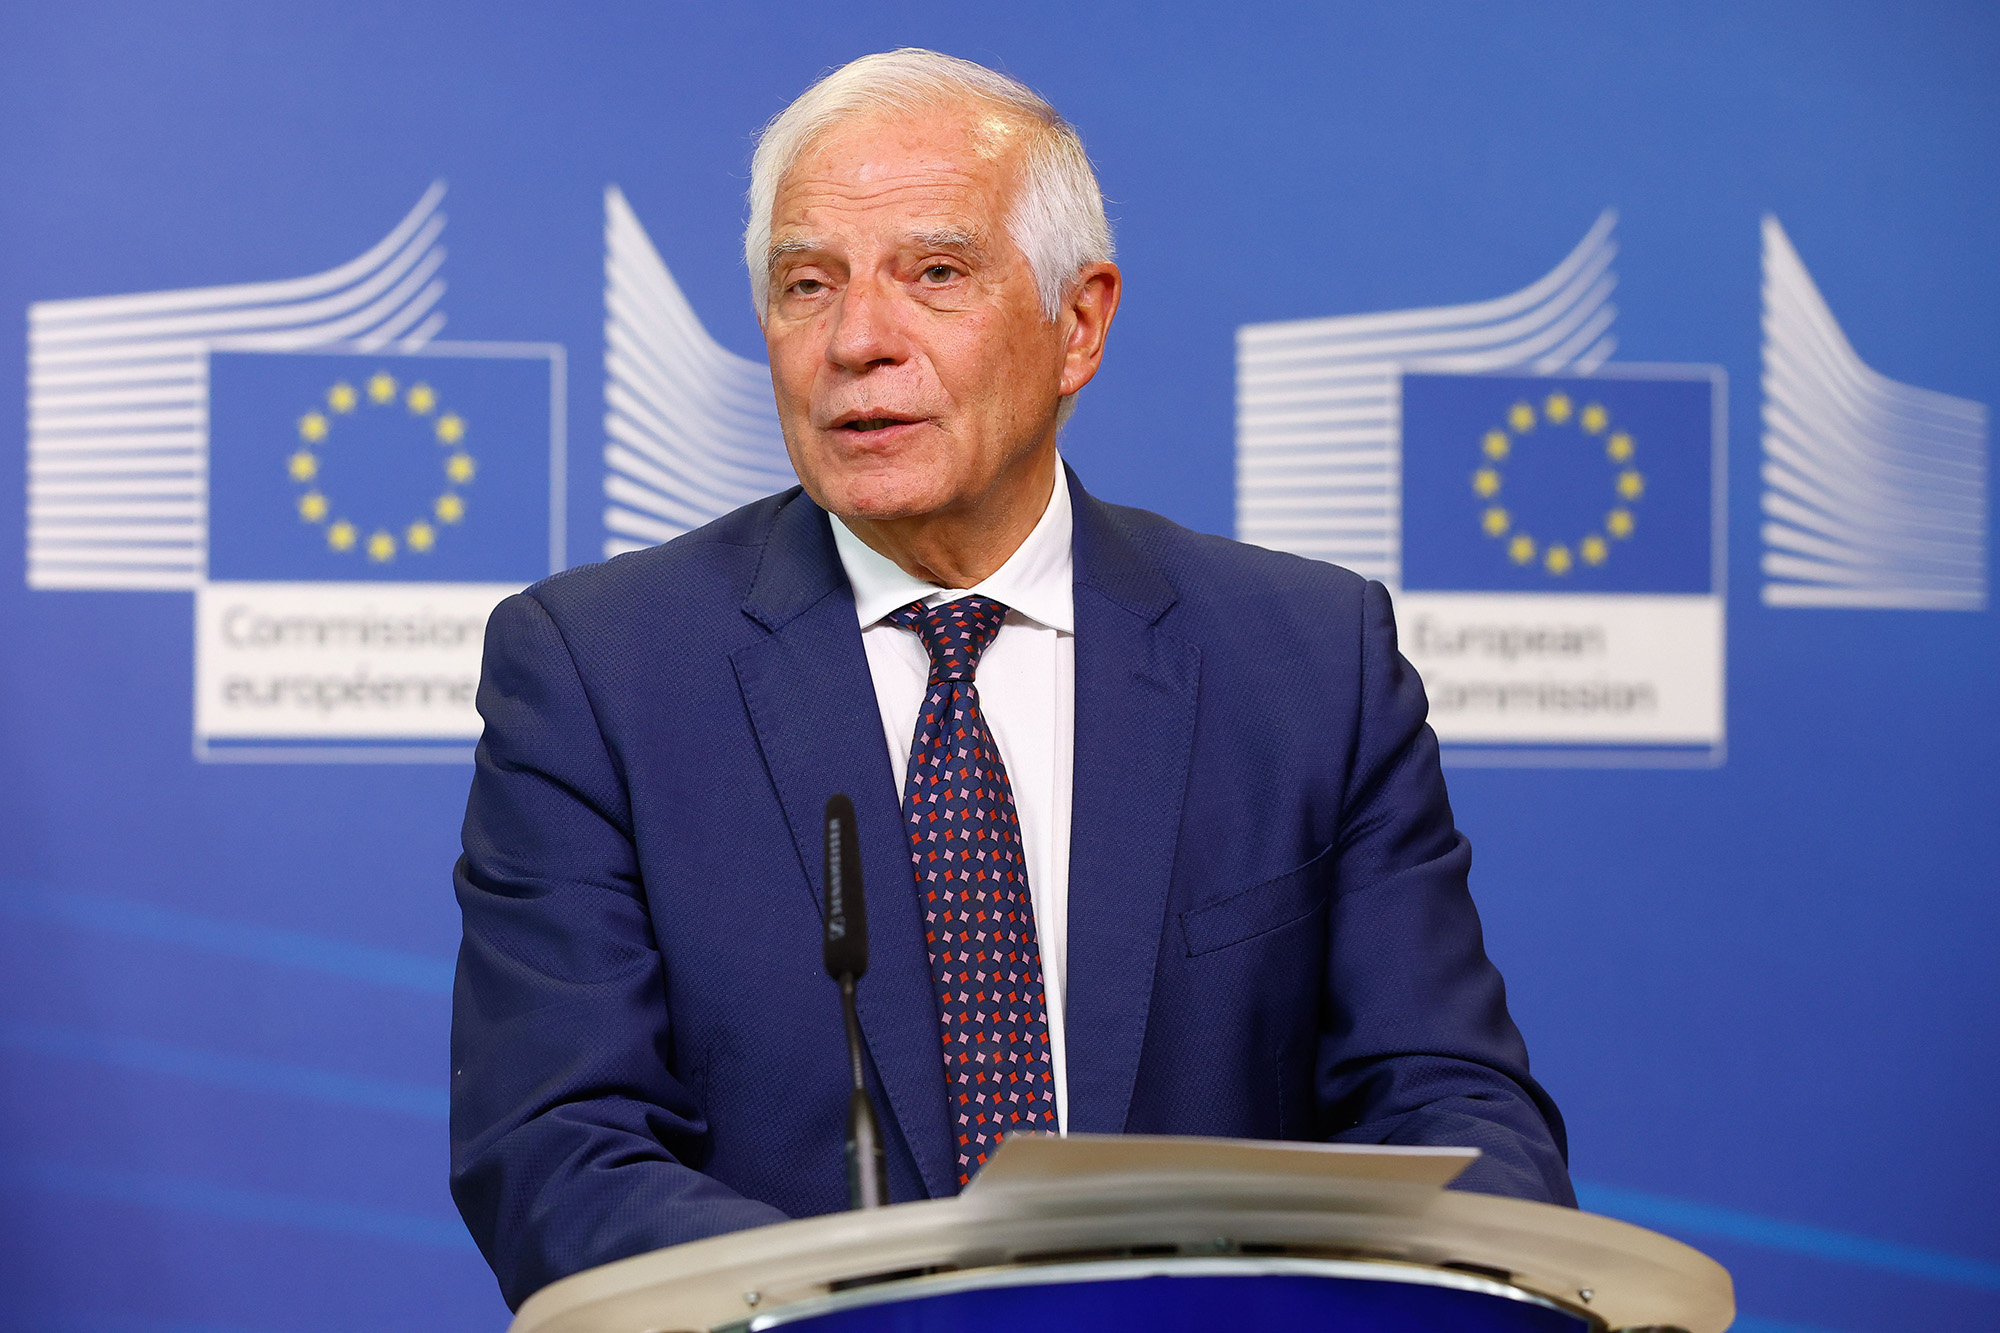 At least 4 European countries to announce recognition of the State of Palestine on May 21